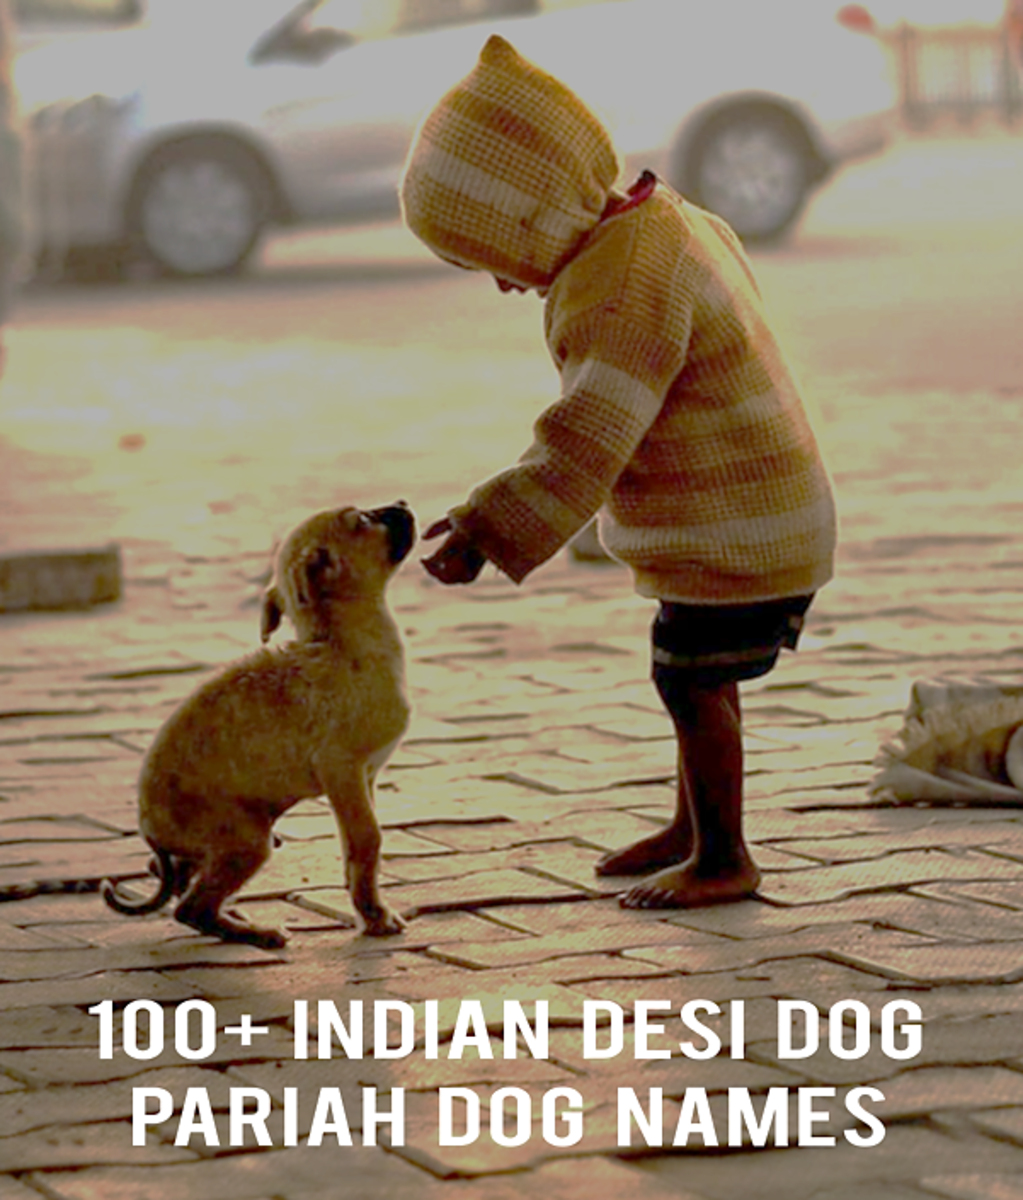 100+ Indian Desi or Pariah Dog Names with Meanings